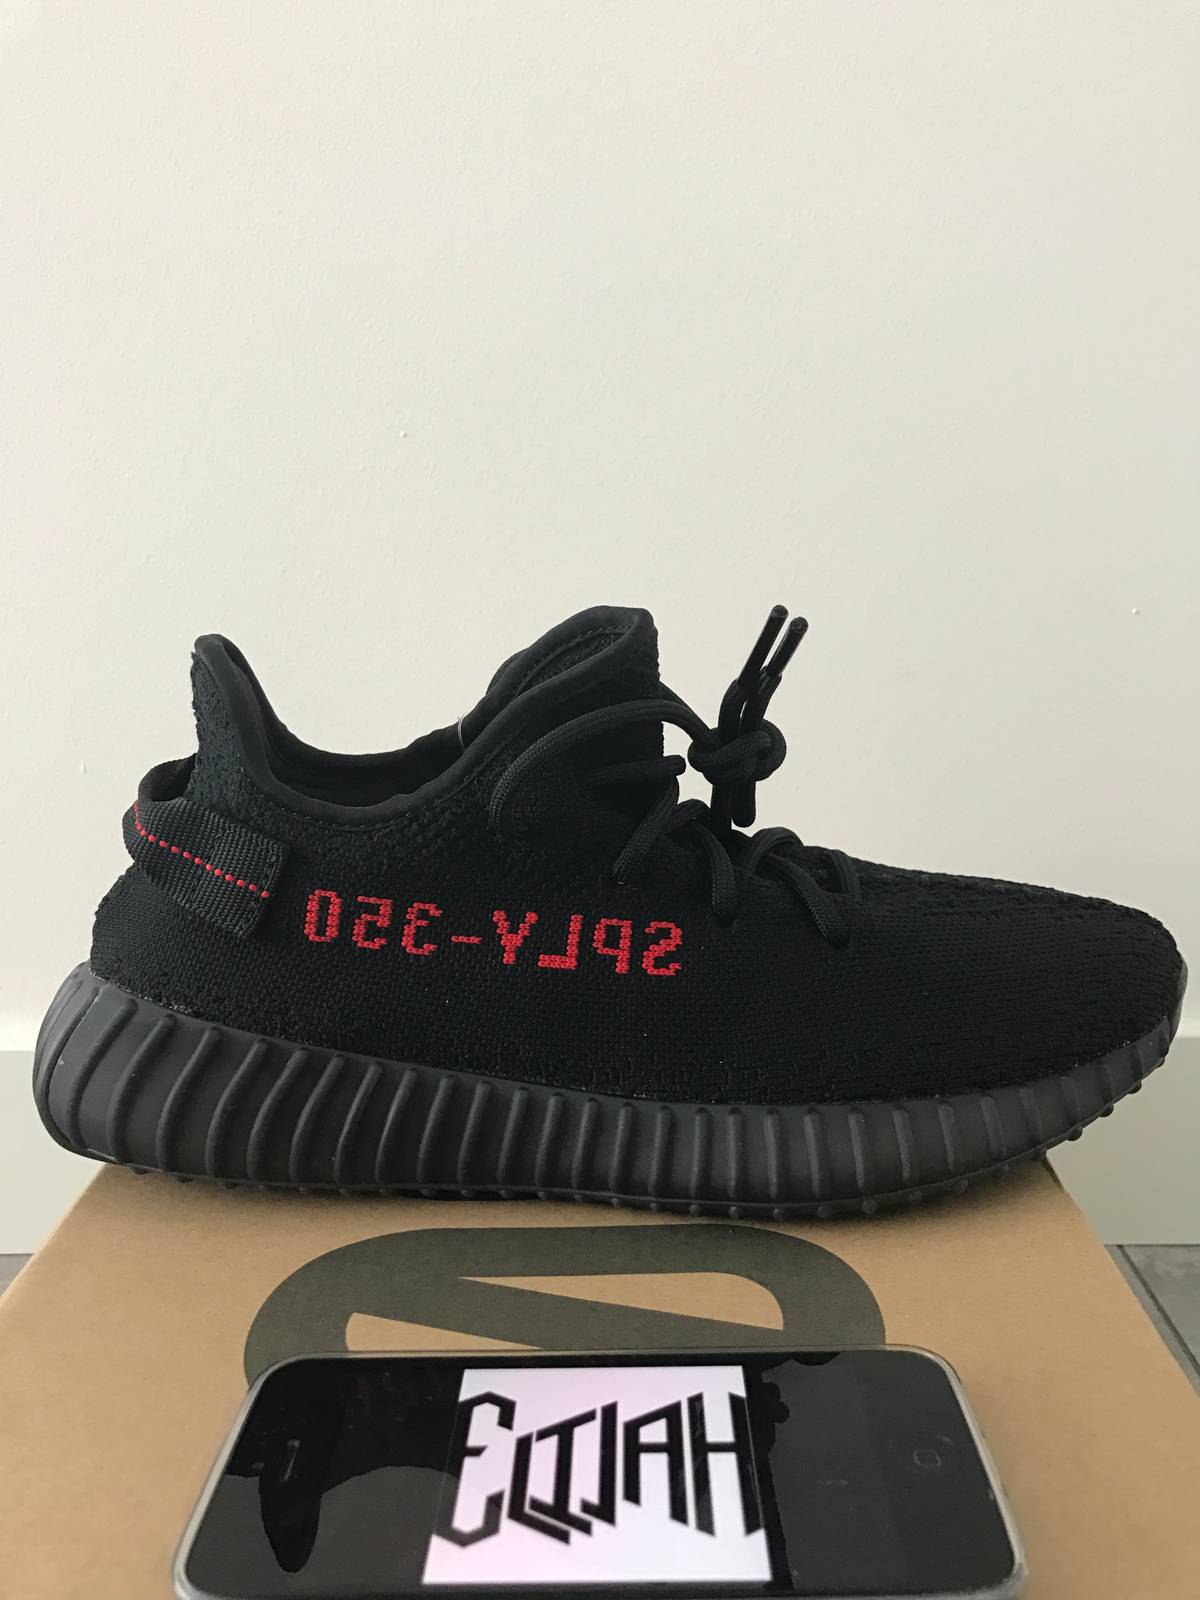 Welcome To Buy Yeezy boost 350 v2 Bred uk Size 9.5